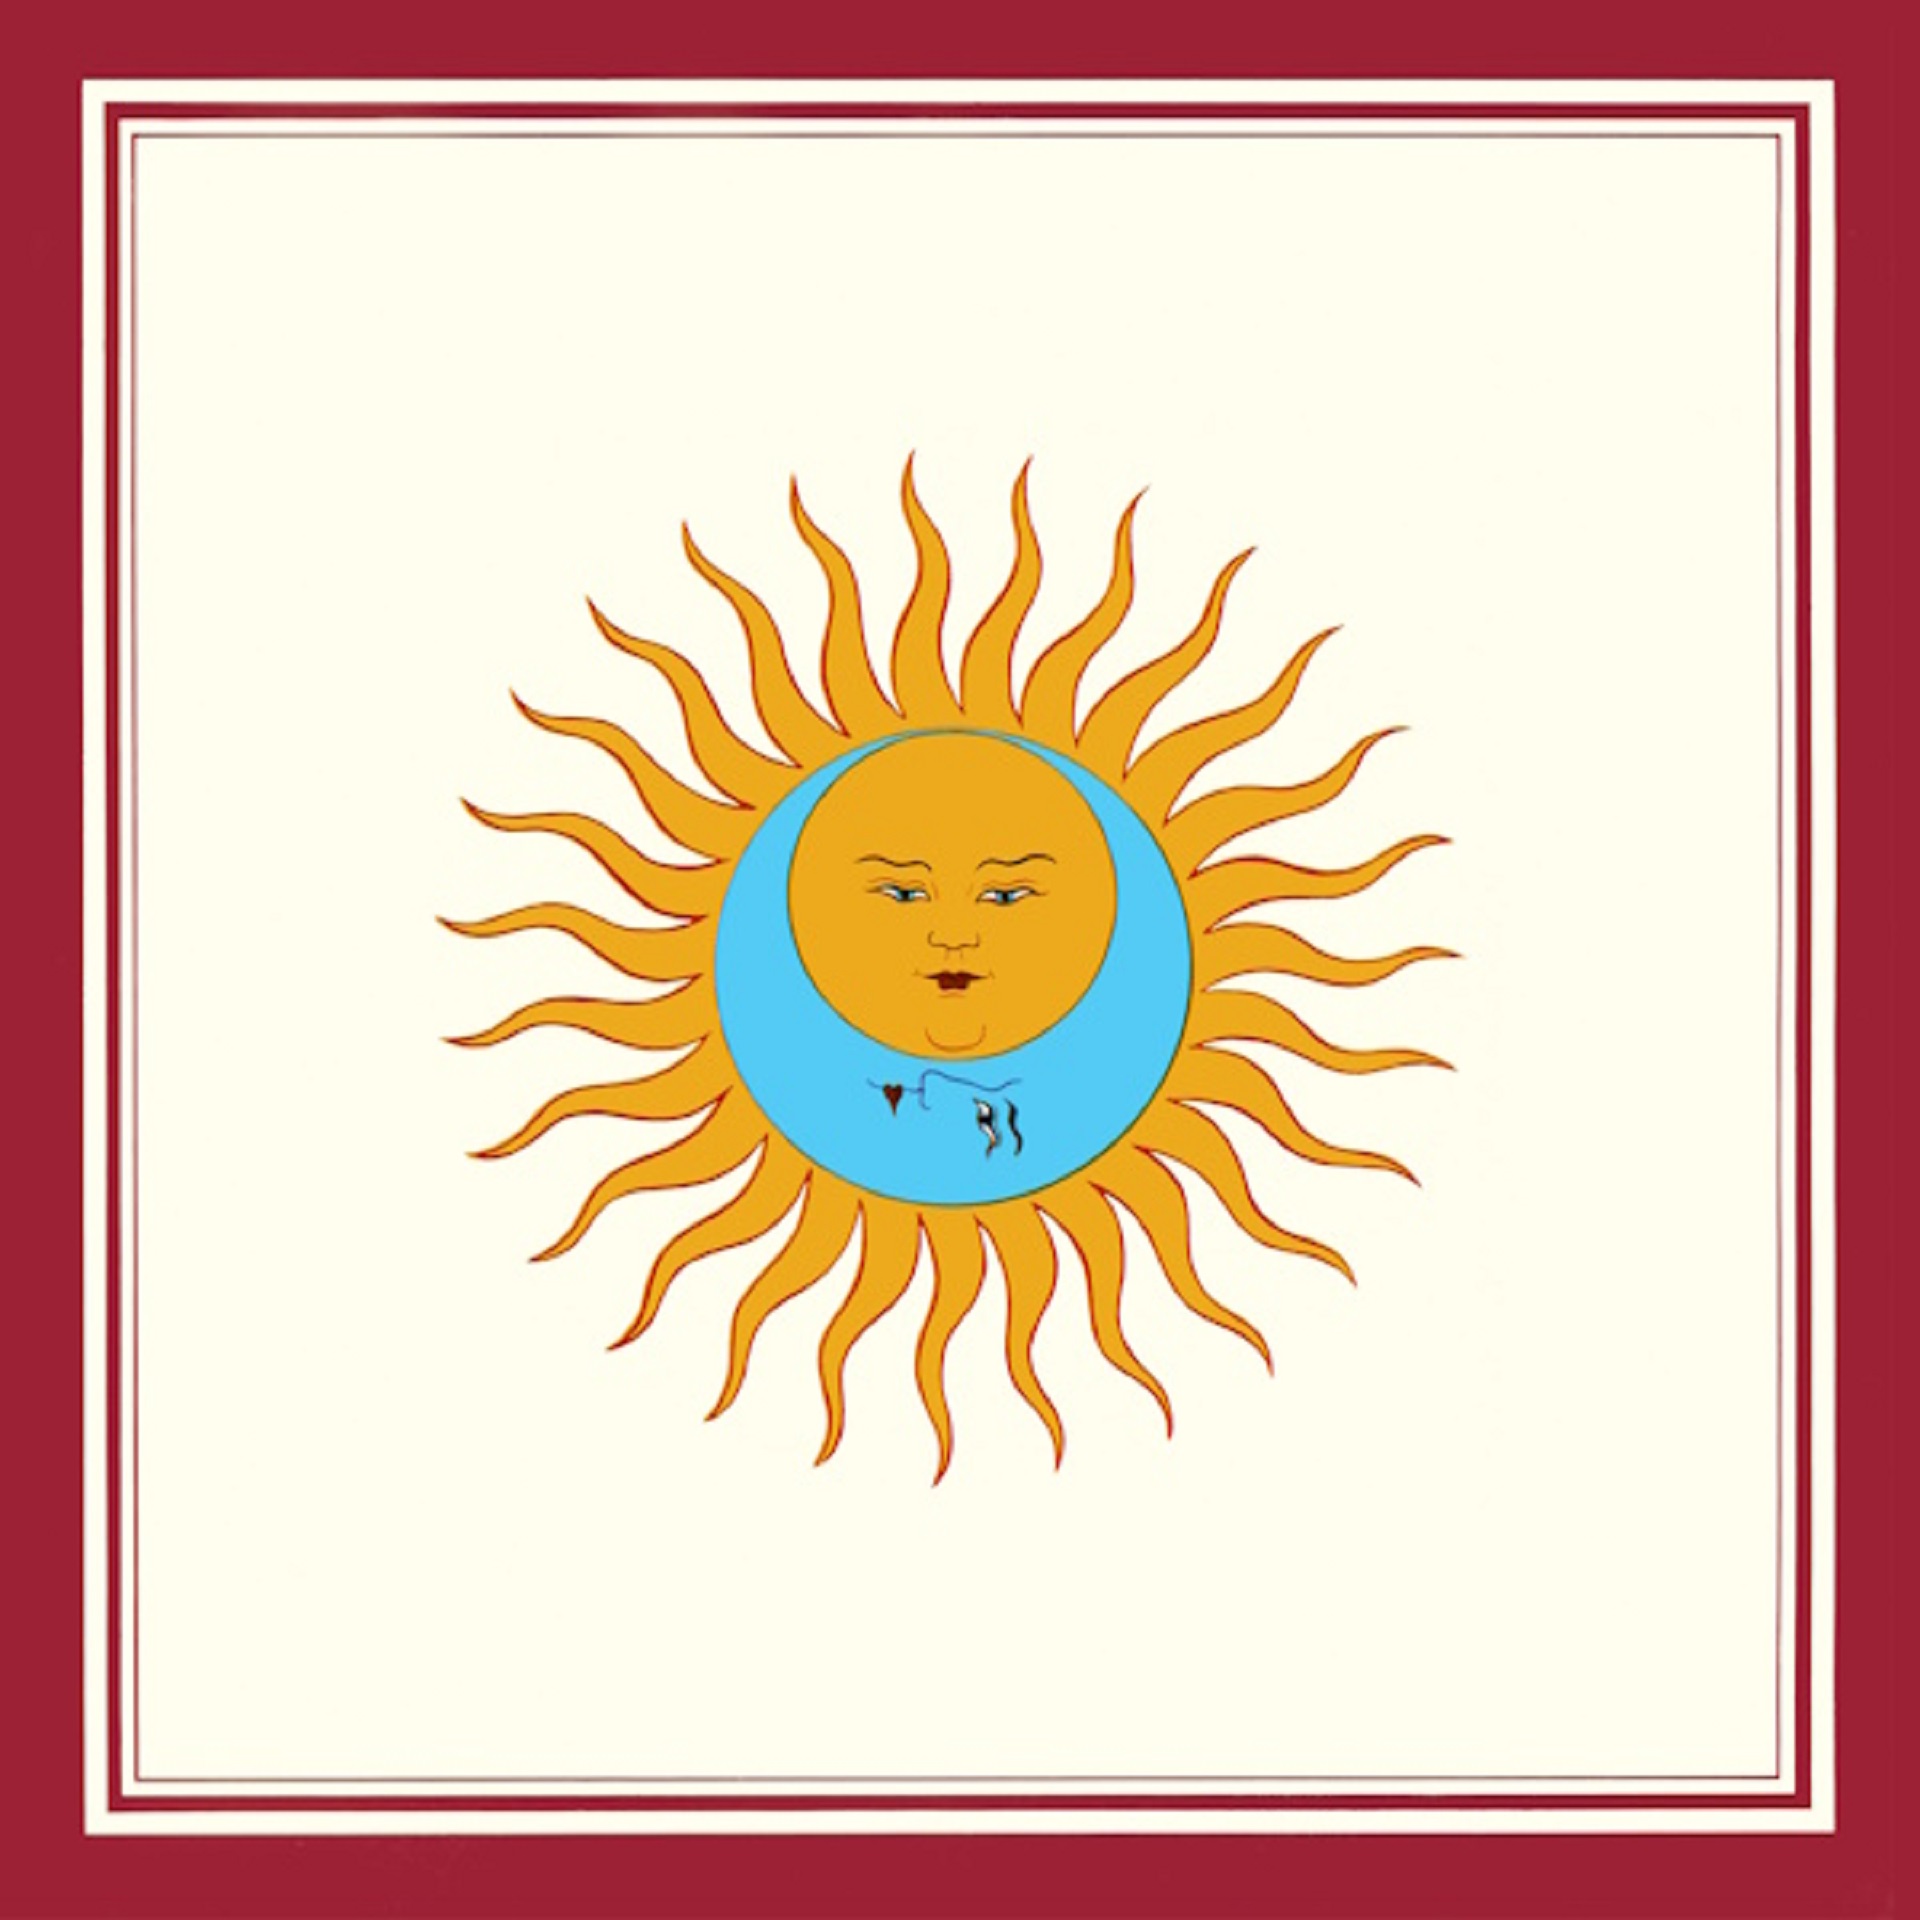 King Crimson “Lark’s Tongues In Aspic” The Complete Recording Sessions - Dolby Atmos 2023 Mixes Blu-ray/2CD Now Available!